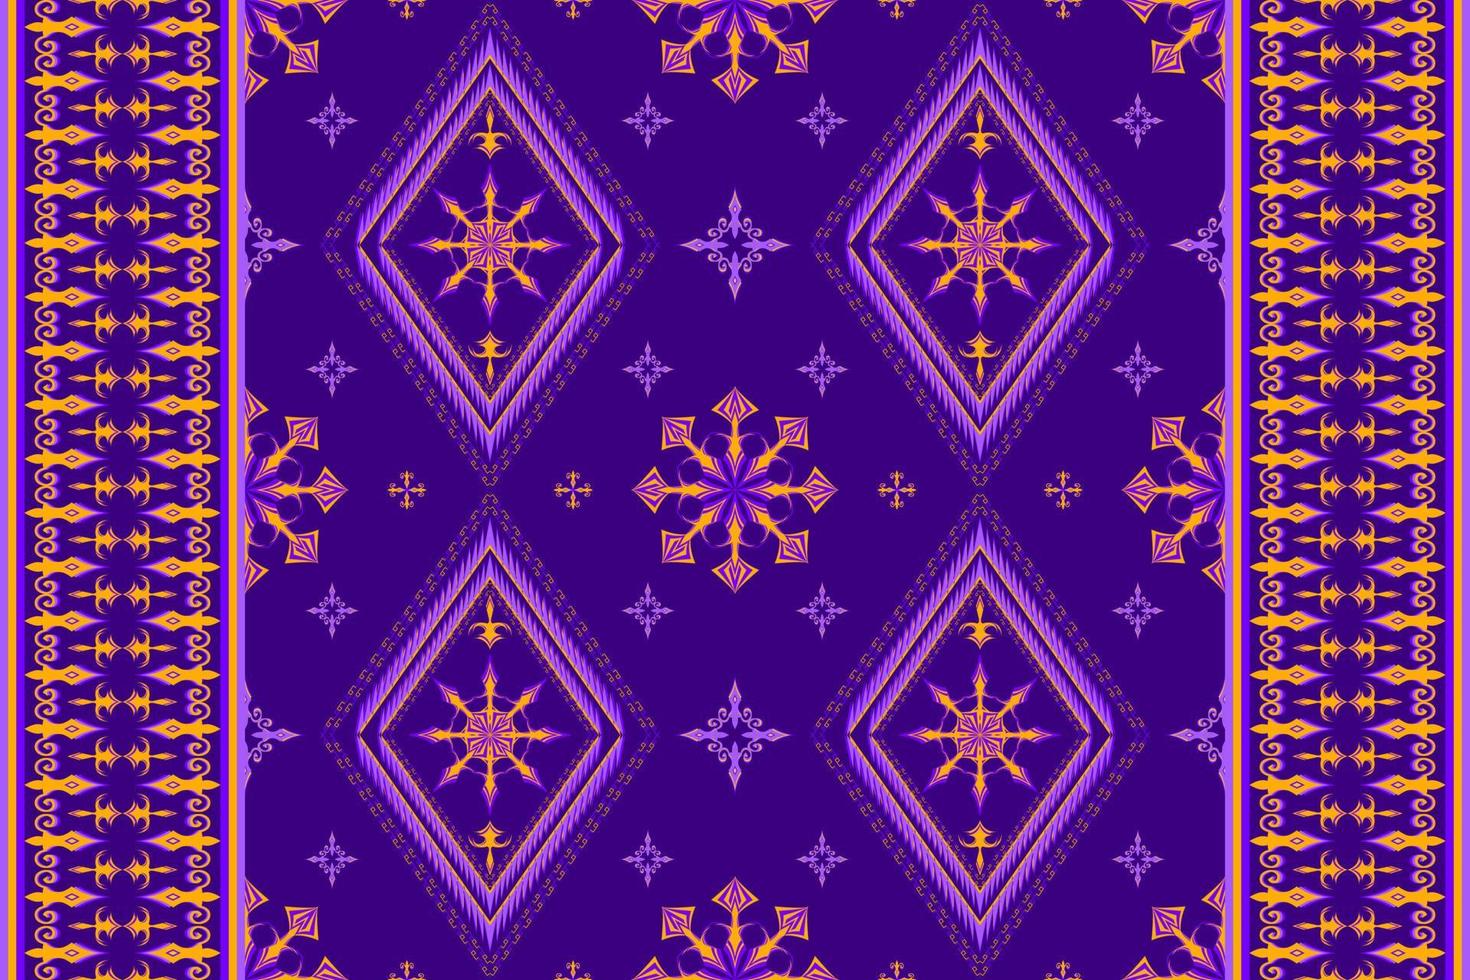 Ethnic folk geometric seamless pattern in purple and yellow tone in vector illustration design for fabric, mat, carpet, scarf, wrapping paper, tile and more